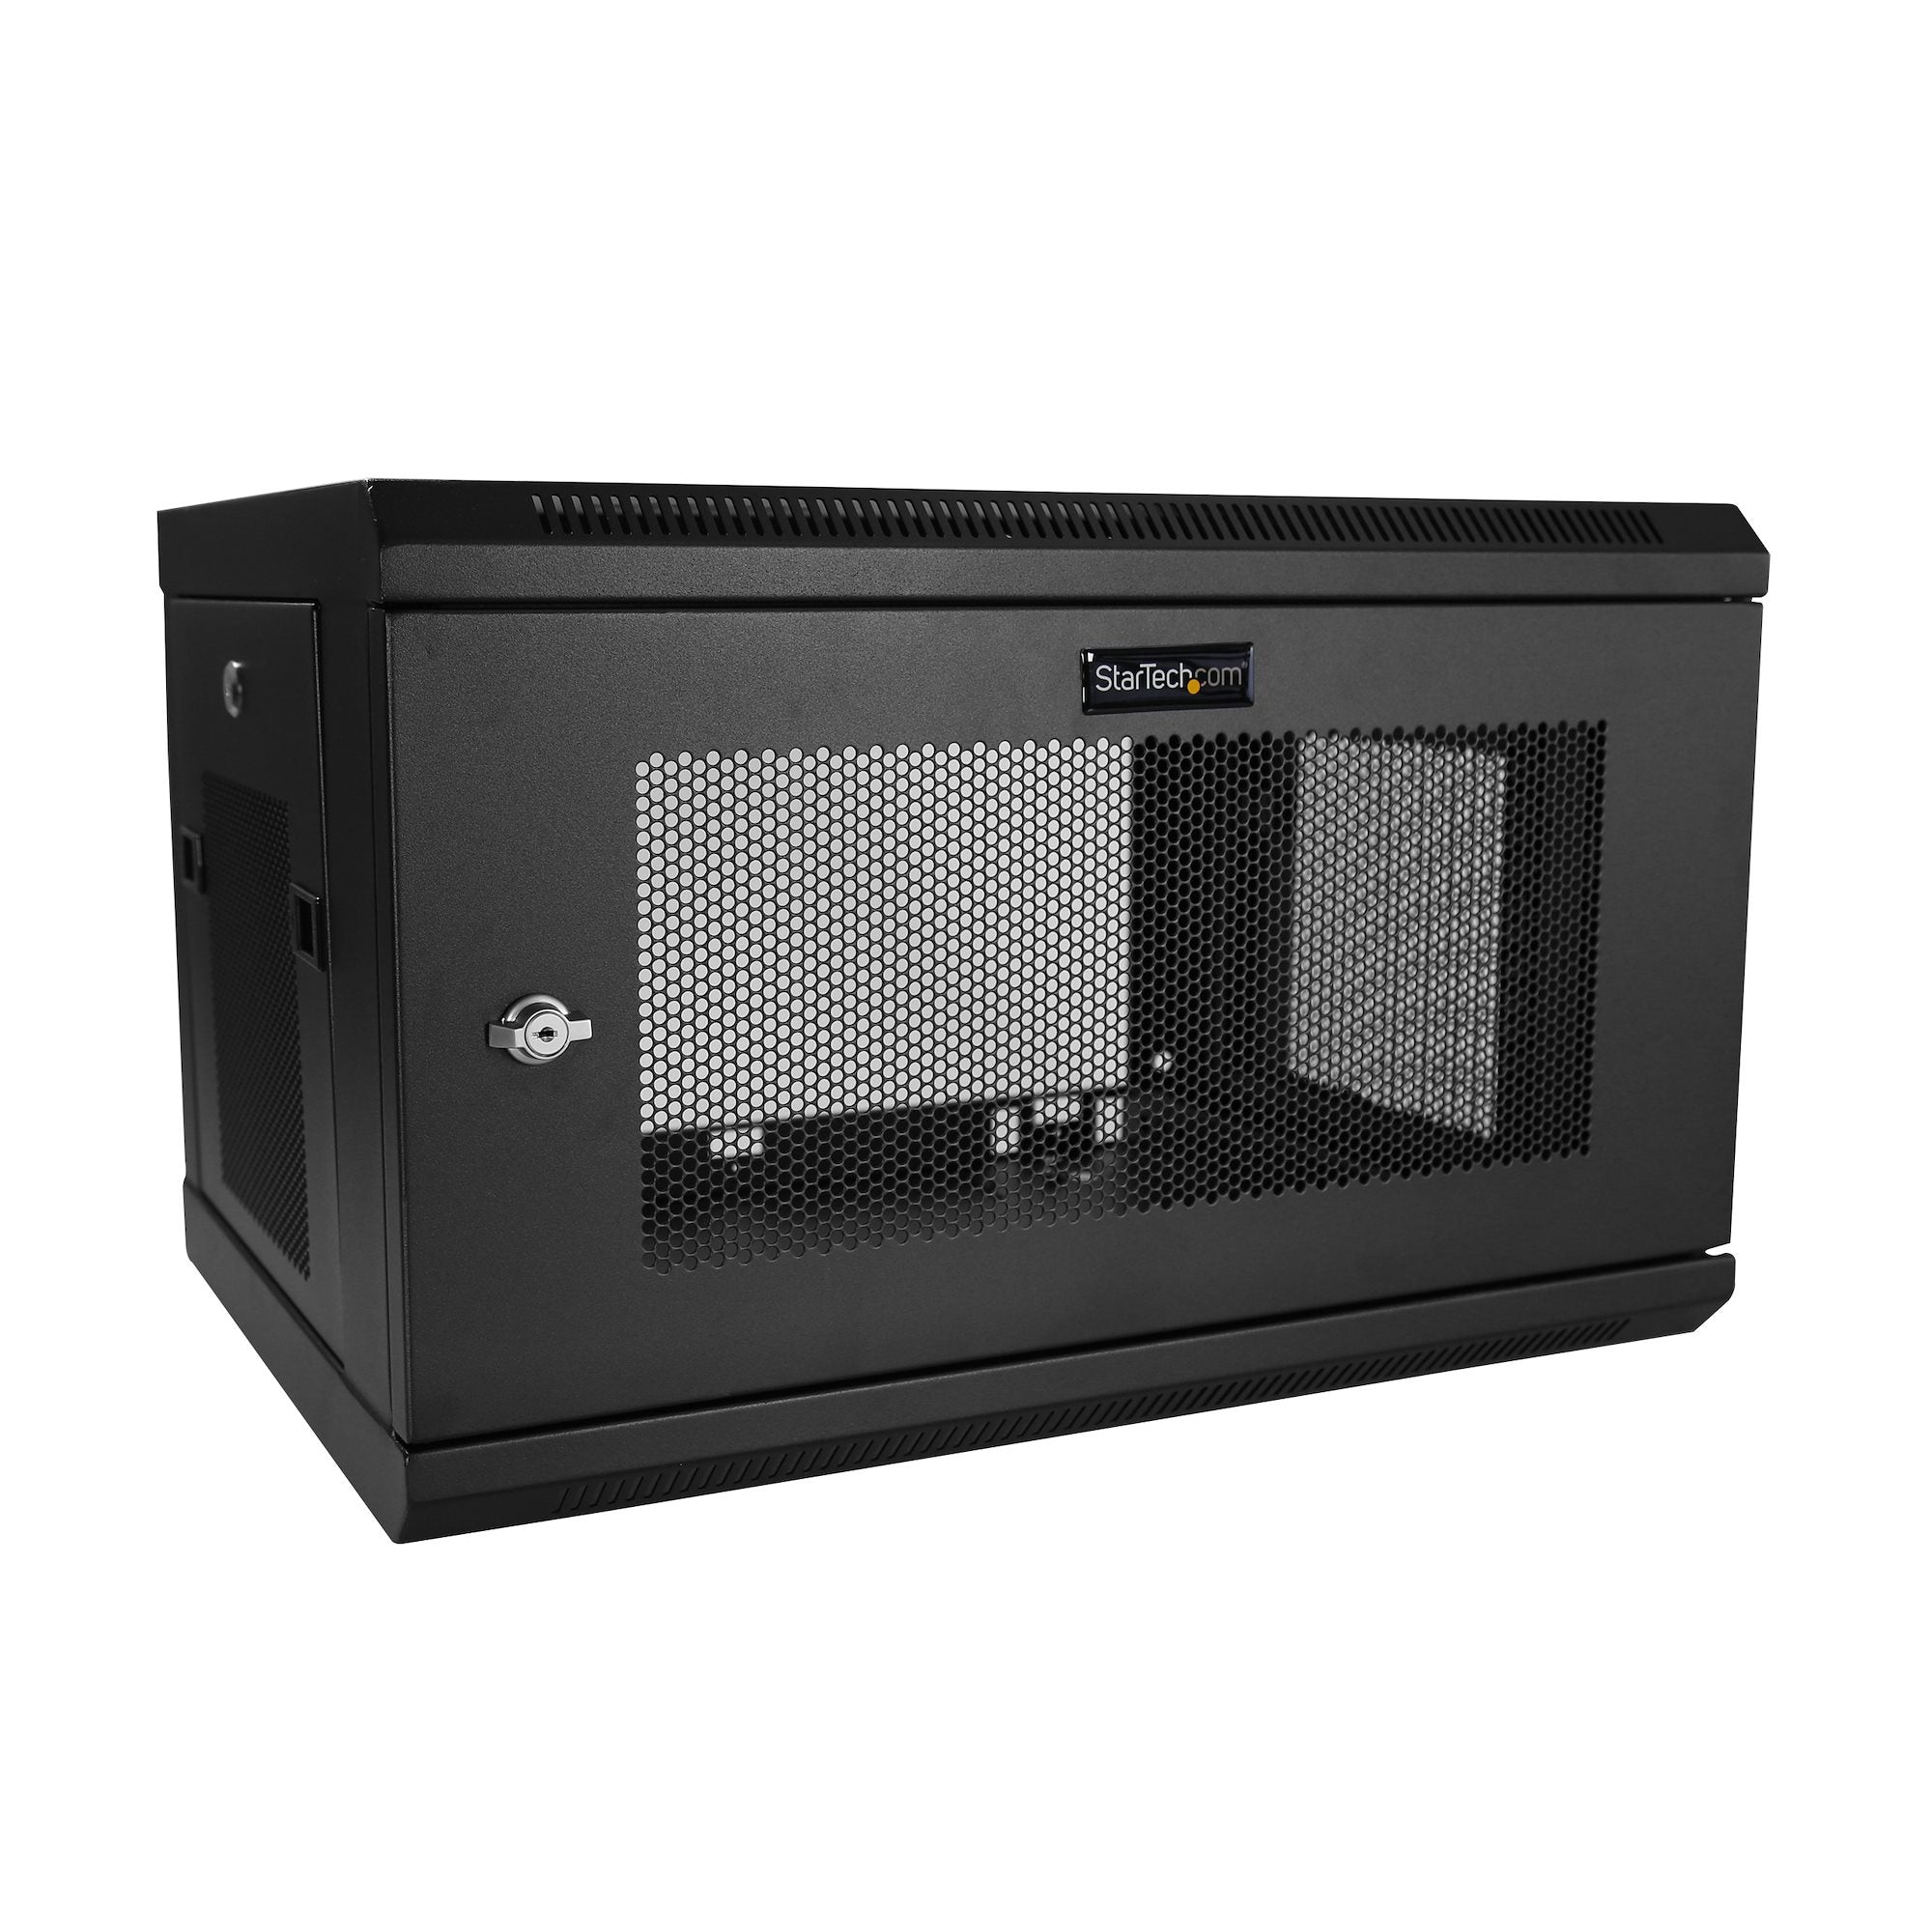 StarTech.com 2-Post 6U Wall Mount Network Cabinet with 1U Shelf, 19" Wall-Mounted Server Rack for Data / Networking / AV / Electronics / Computer Equipment, Small Vented Rack Enclosure